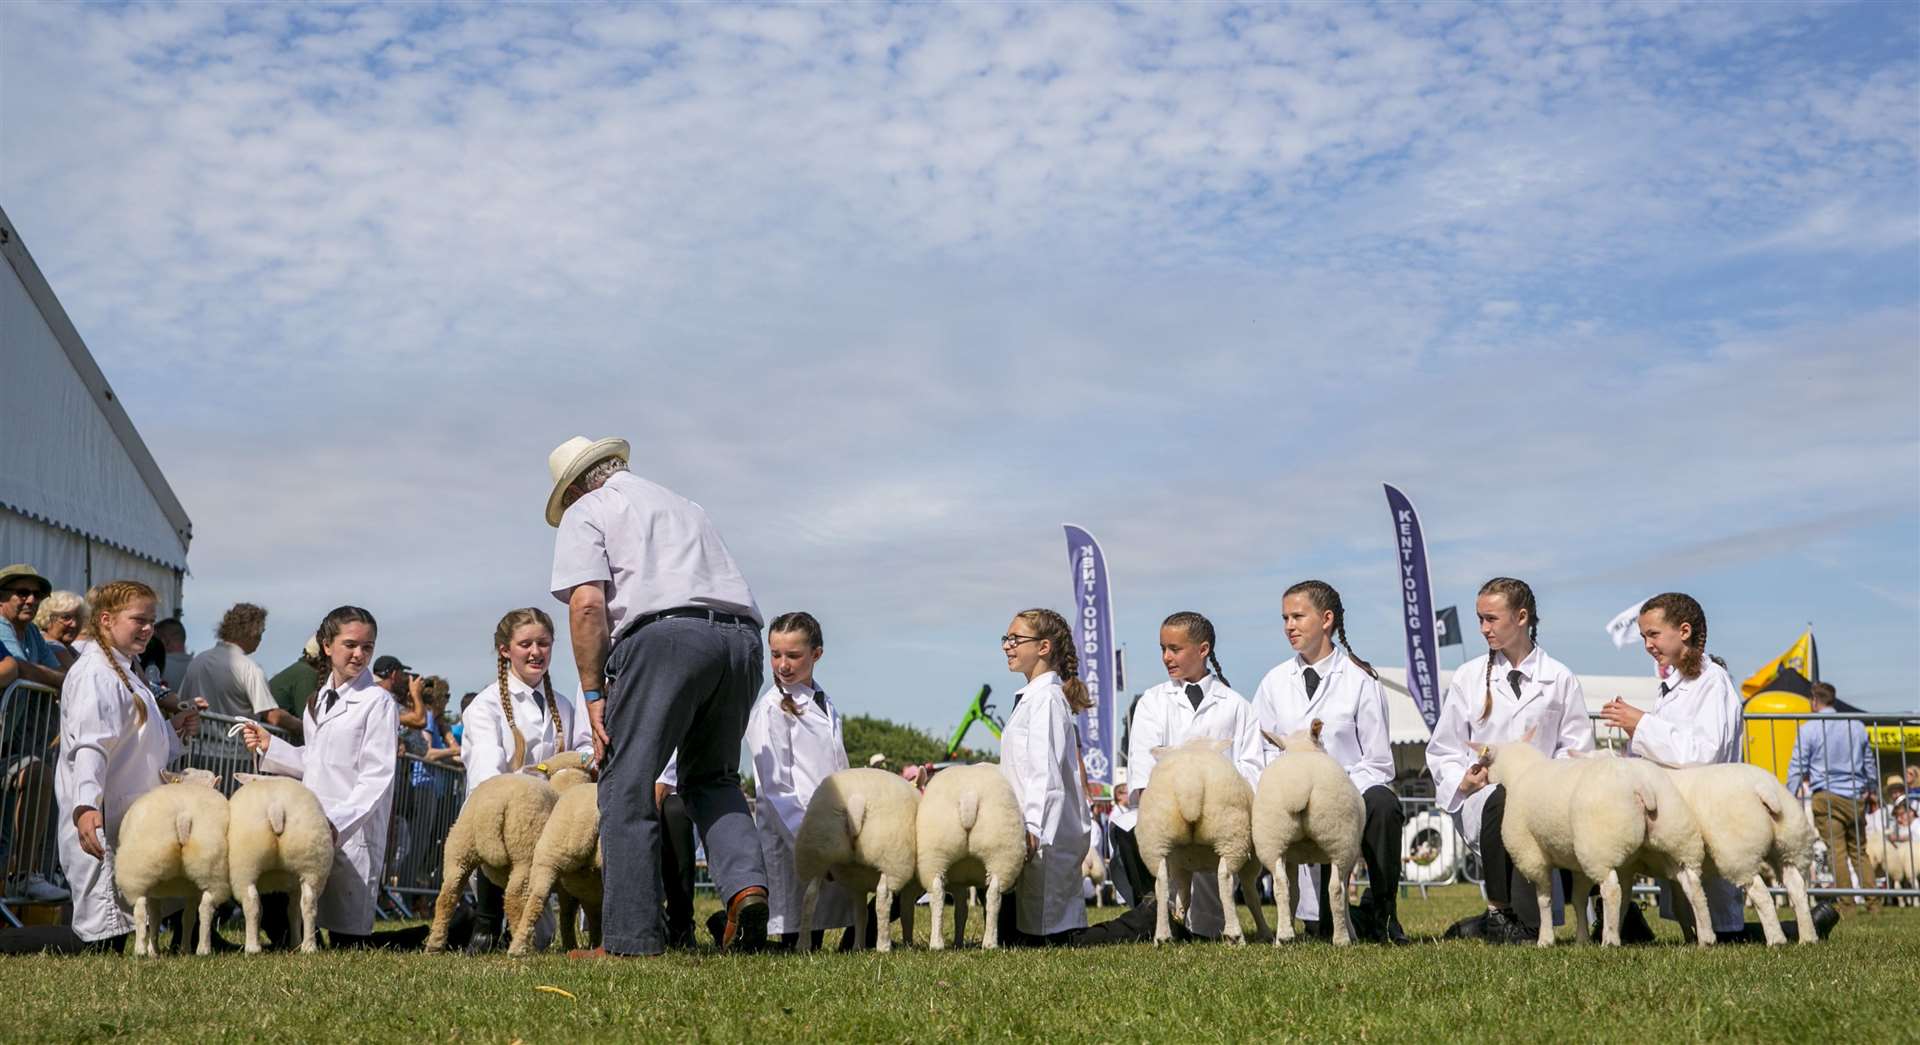 Young farmers bring their carefully groomed animals to the show Picture: Thomas Alexander